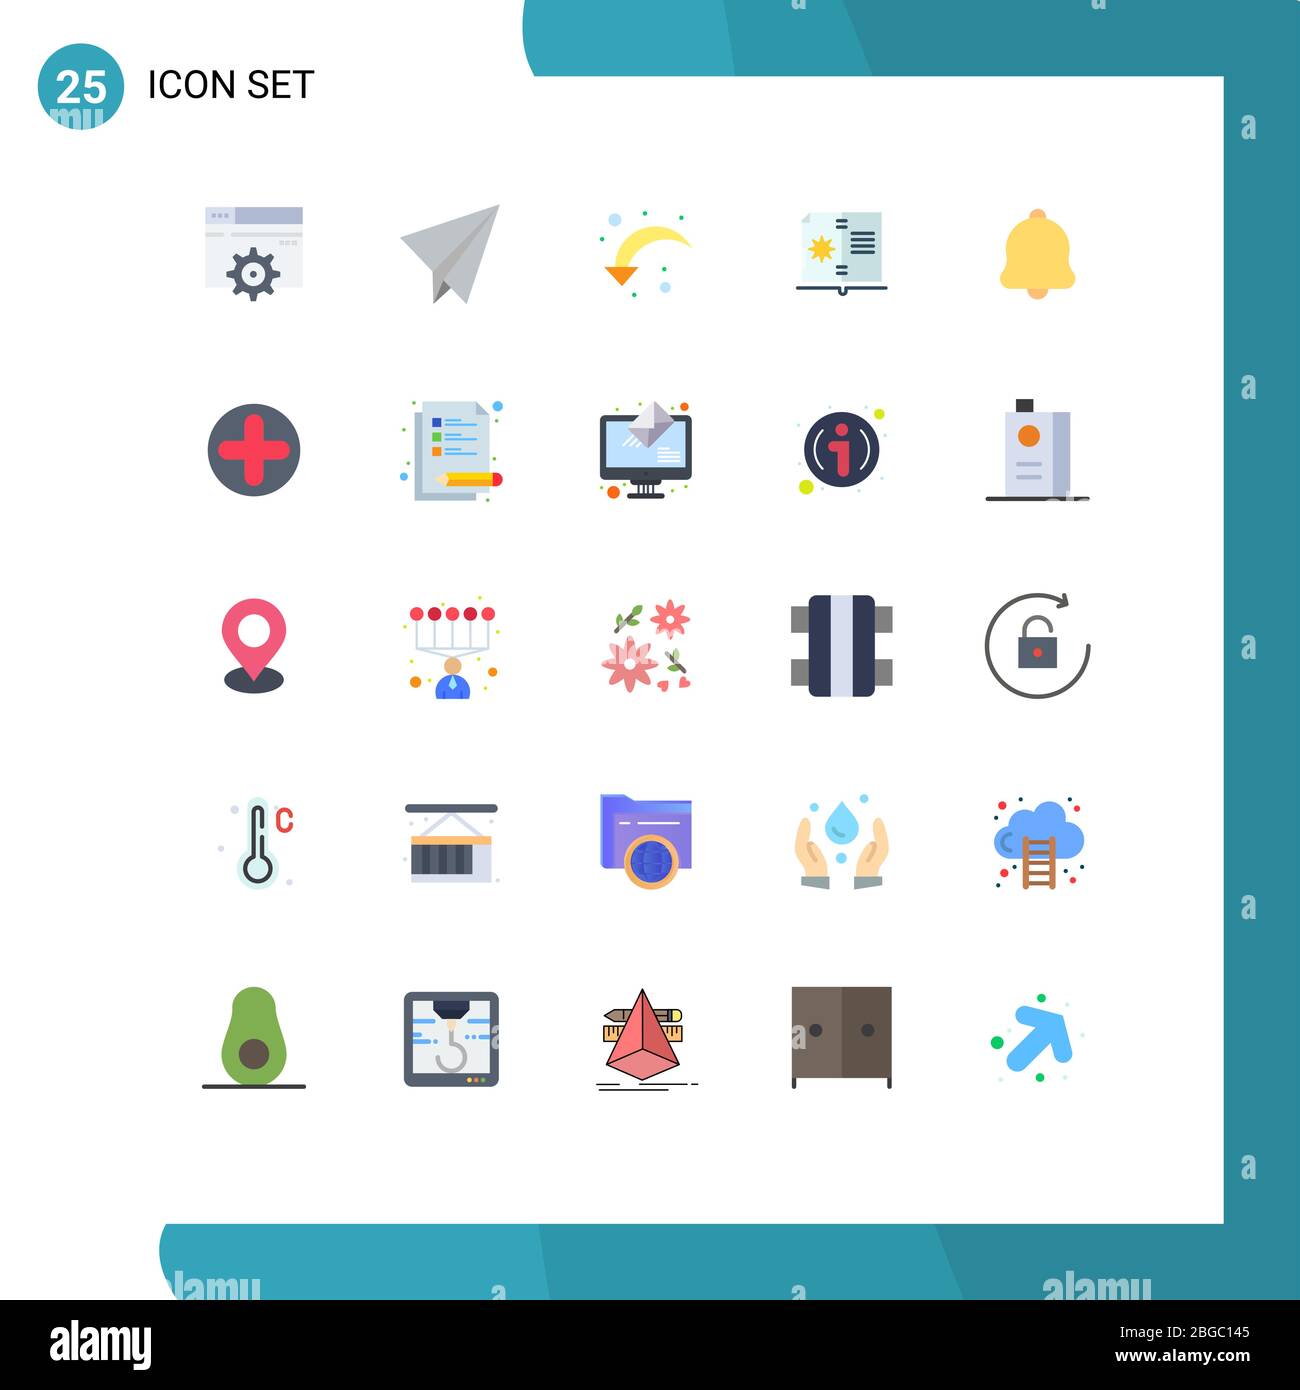 Mobile Interface Flat Color Set of 25 Pictograms of notification, alert, reload, instruction, guide Editable Vector Design Elements Stock Vector